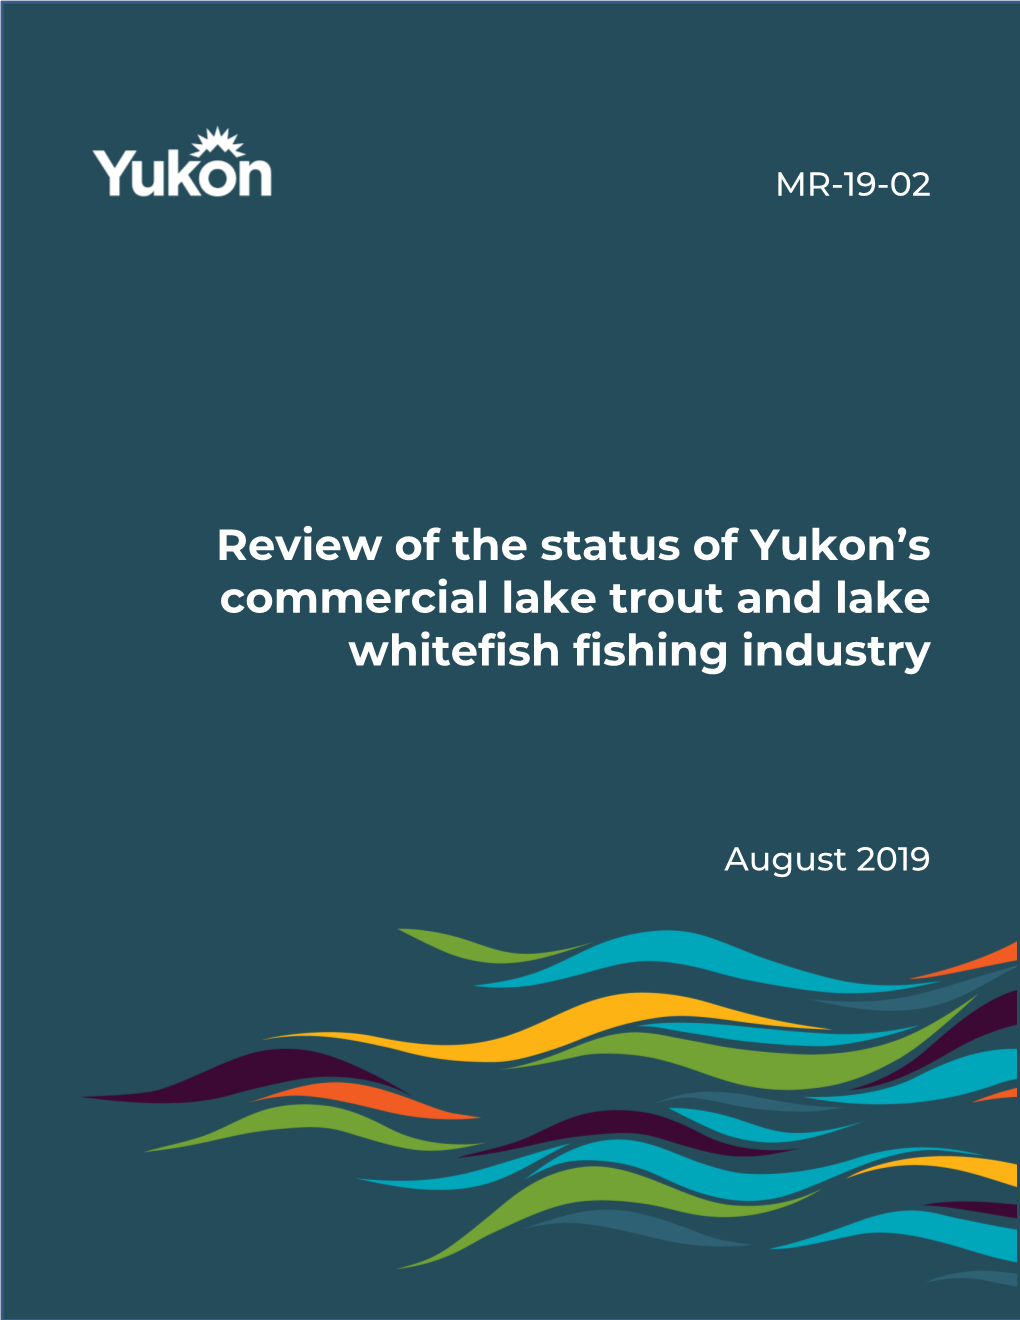 Review of the Status of Yukon's Commercial Lake Trout and Lake